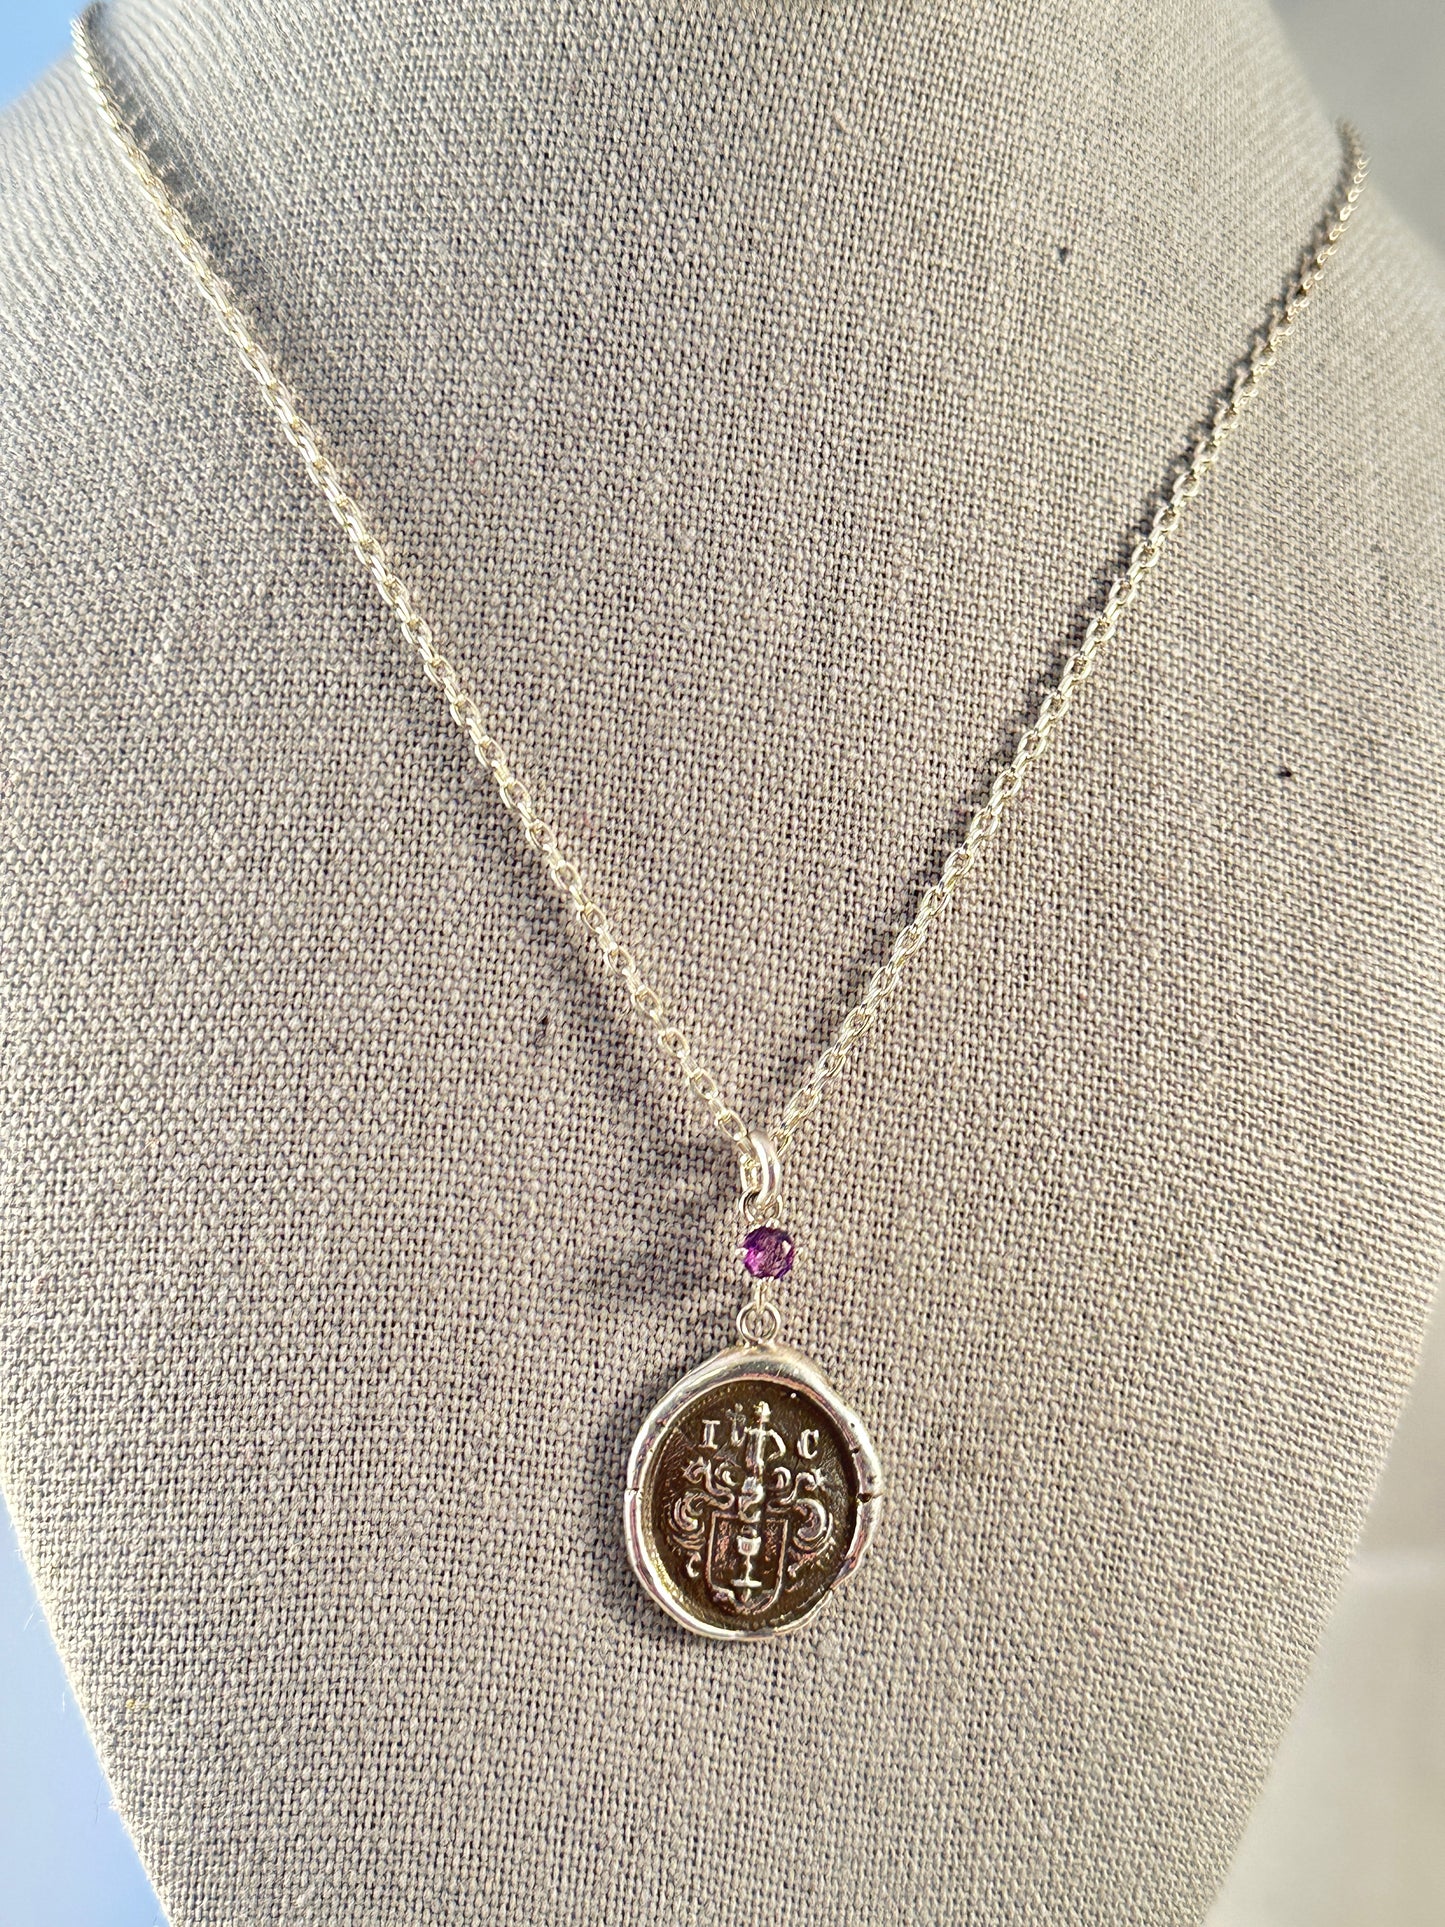 18” Chalice Crest with Amethyst Sterling Necklace